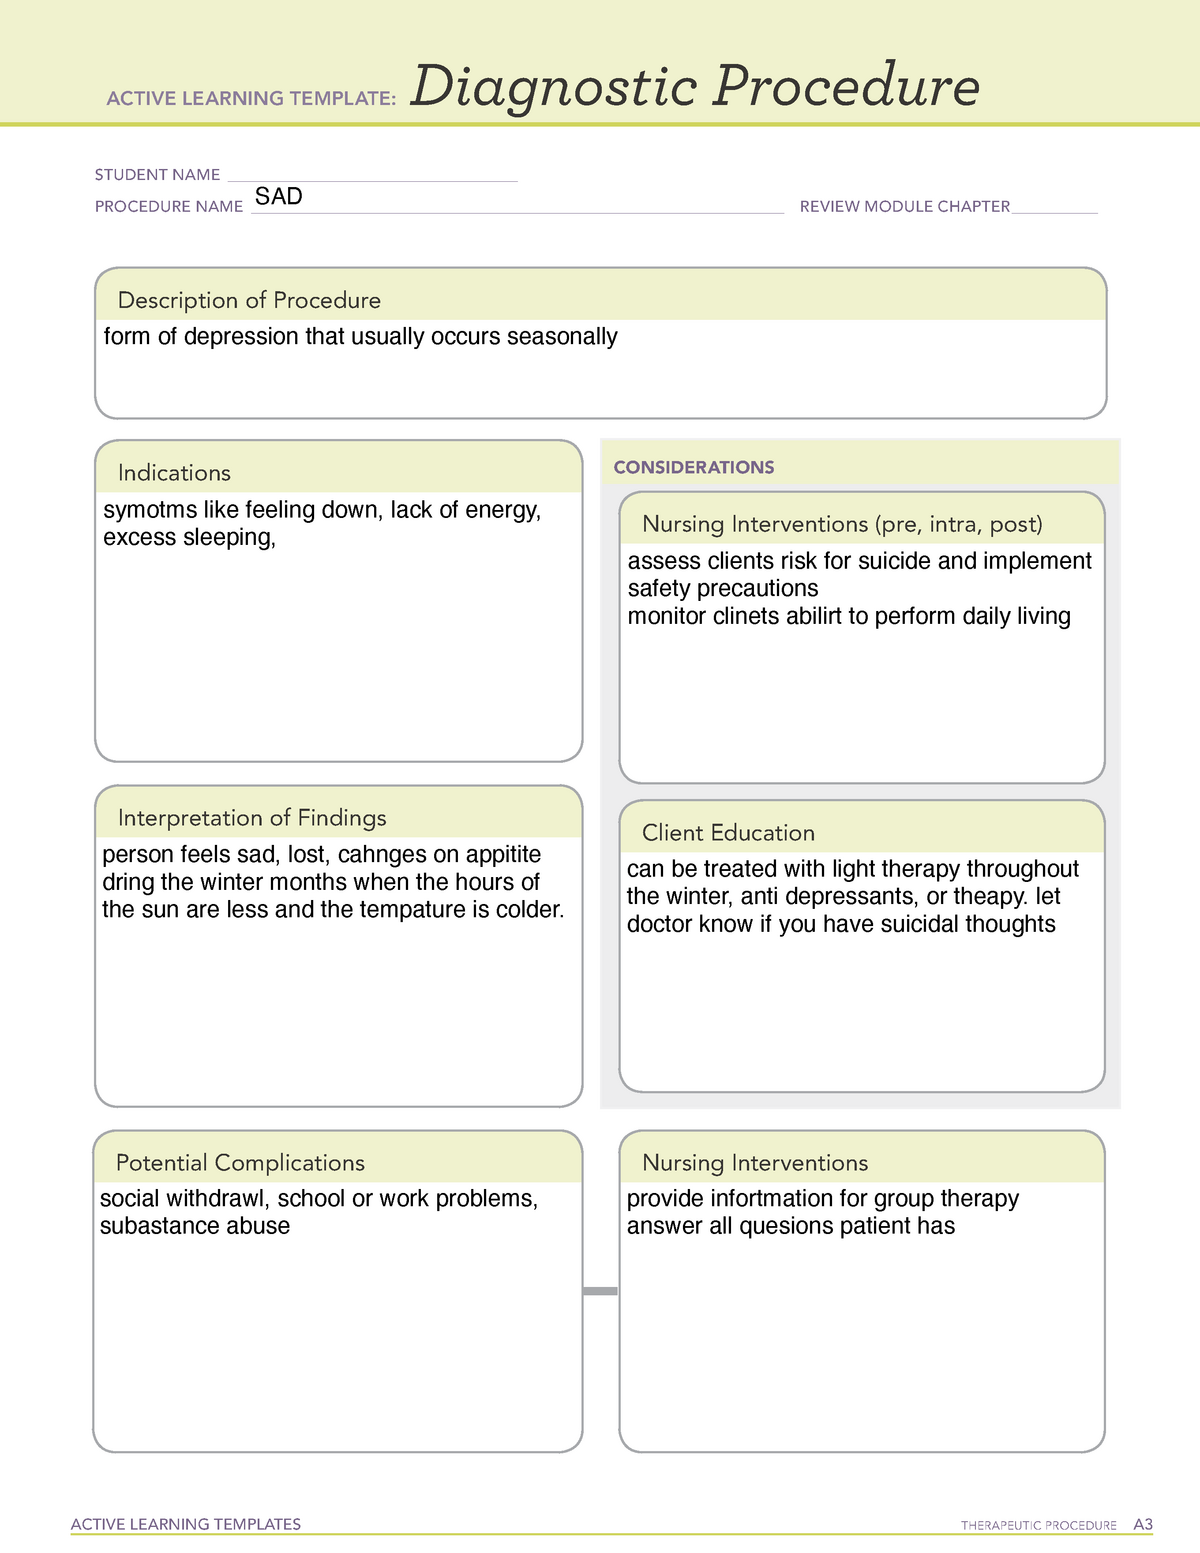 Active Learning Template Diagnostic Procedure form ACTIVE LEARNING